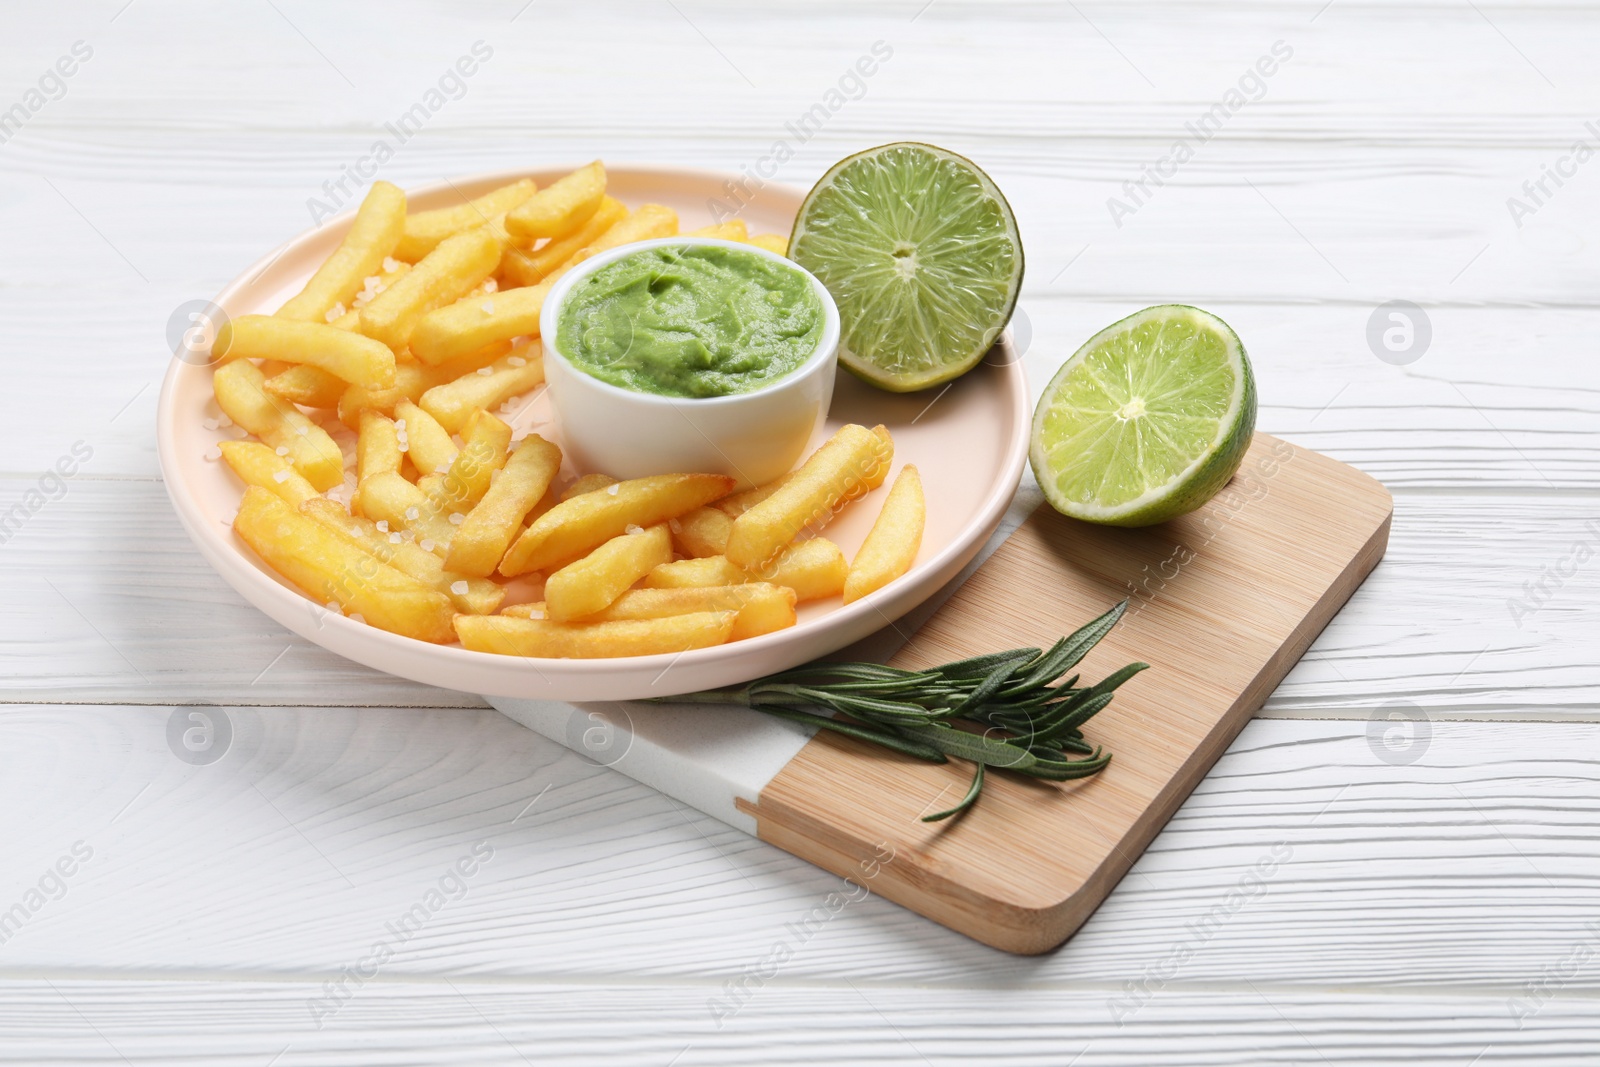 Photo of Tray with plate of french fries, avocado dip, lime and rosemary on white wooden table